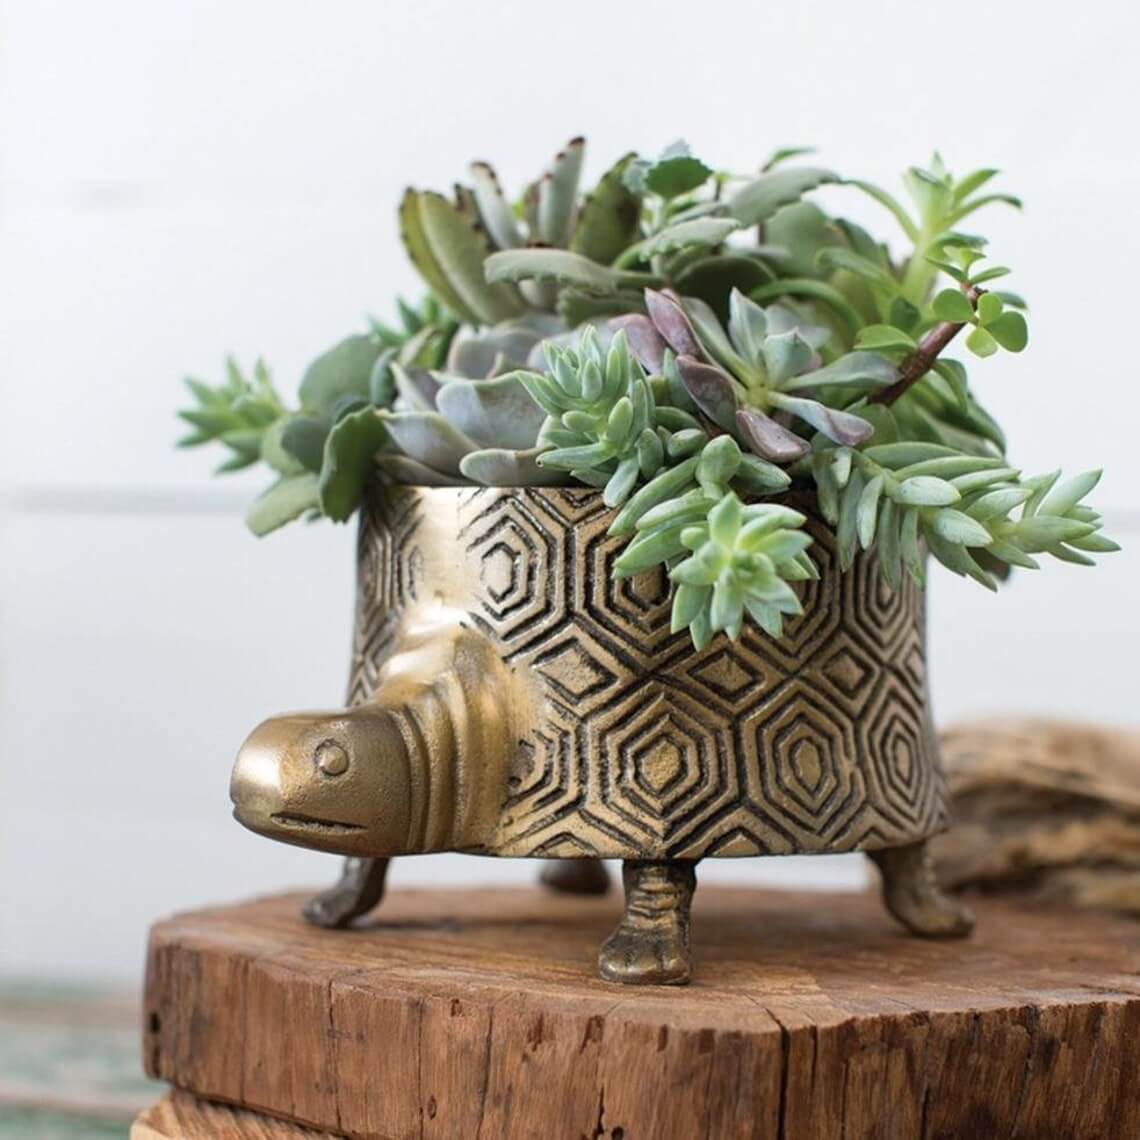 Gold Turtle Planter with a Hexagon Pattern